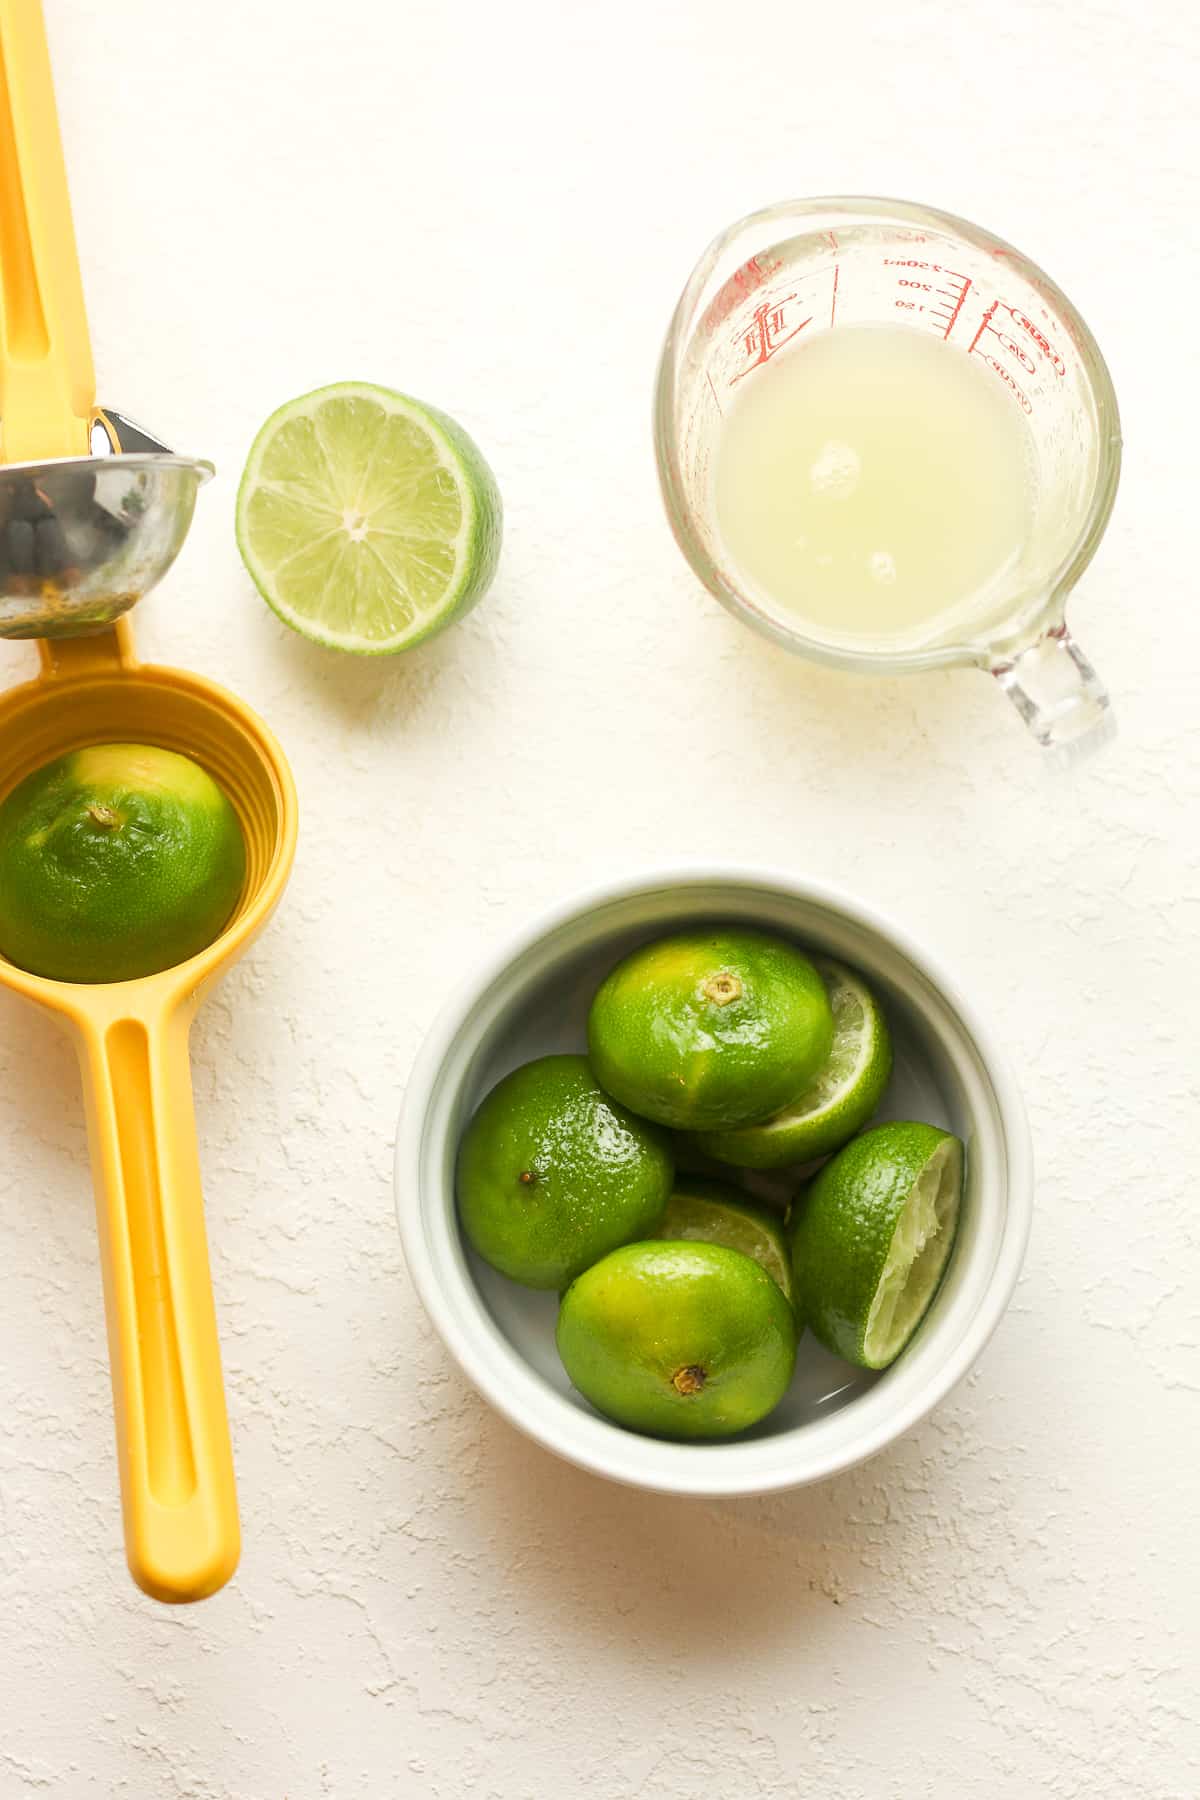 The citrus press with a bowl of lime halves and a measuring cup of lime juice.